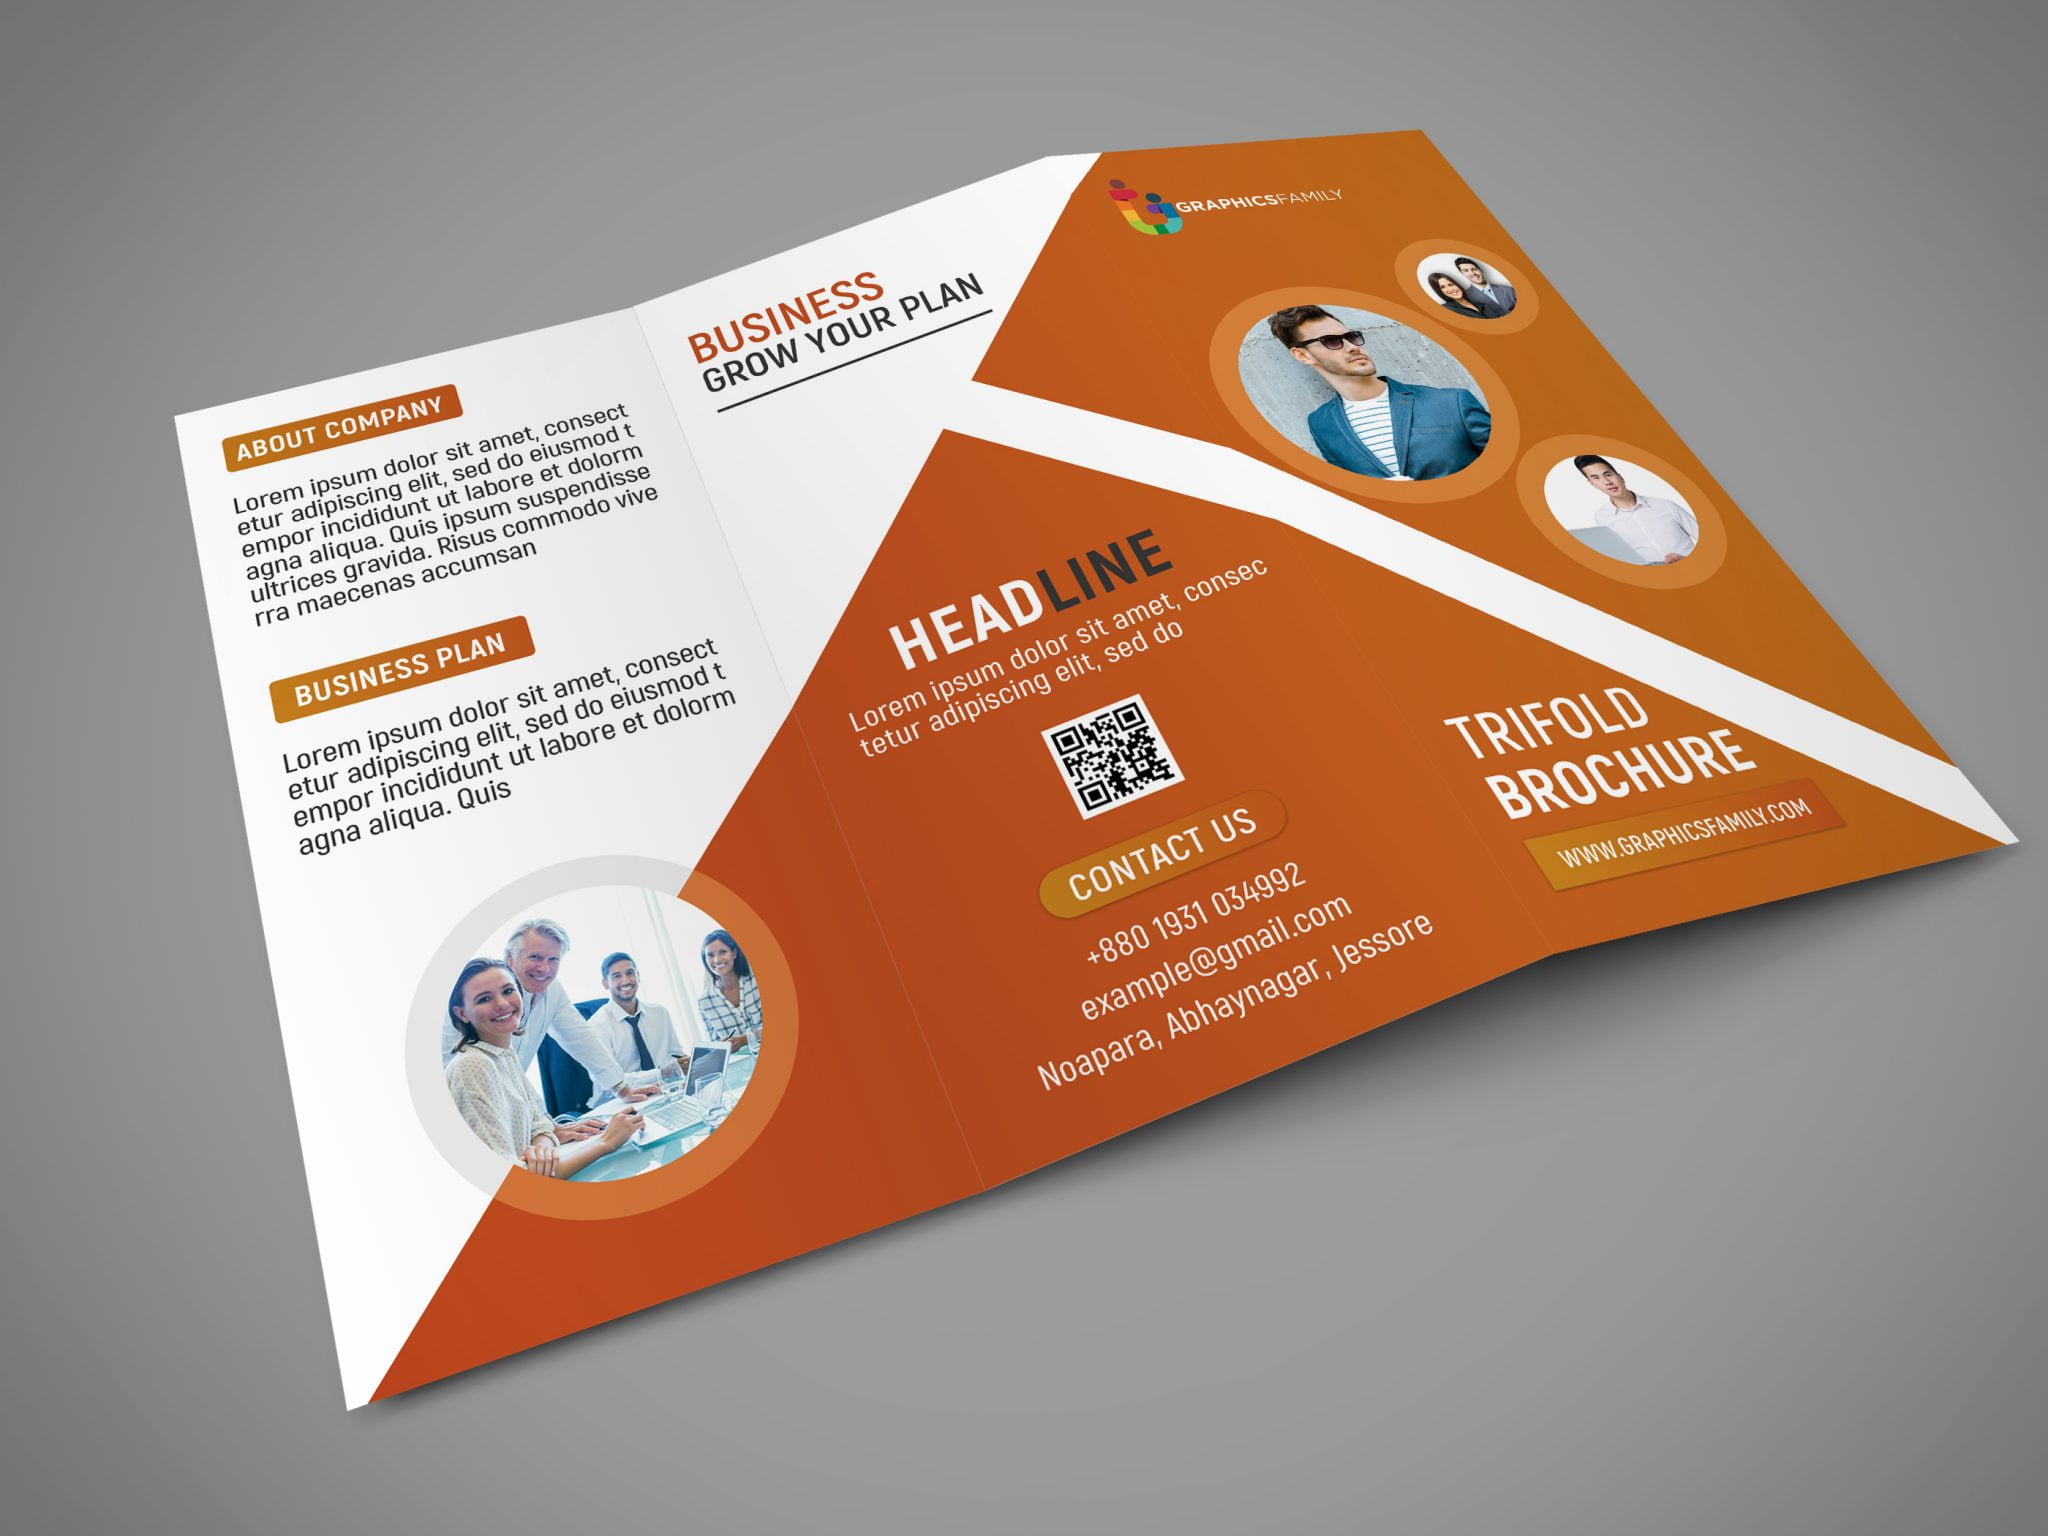 professional-tri-fold-brochure-template-graphicsfamily